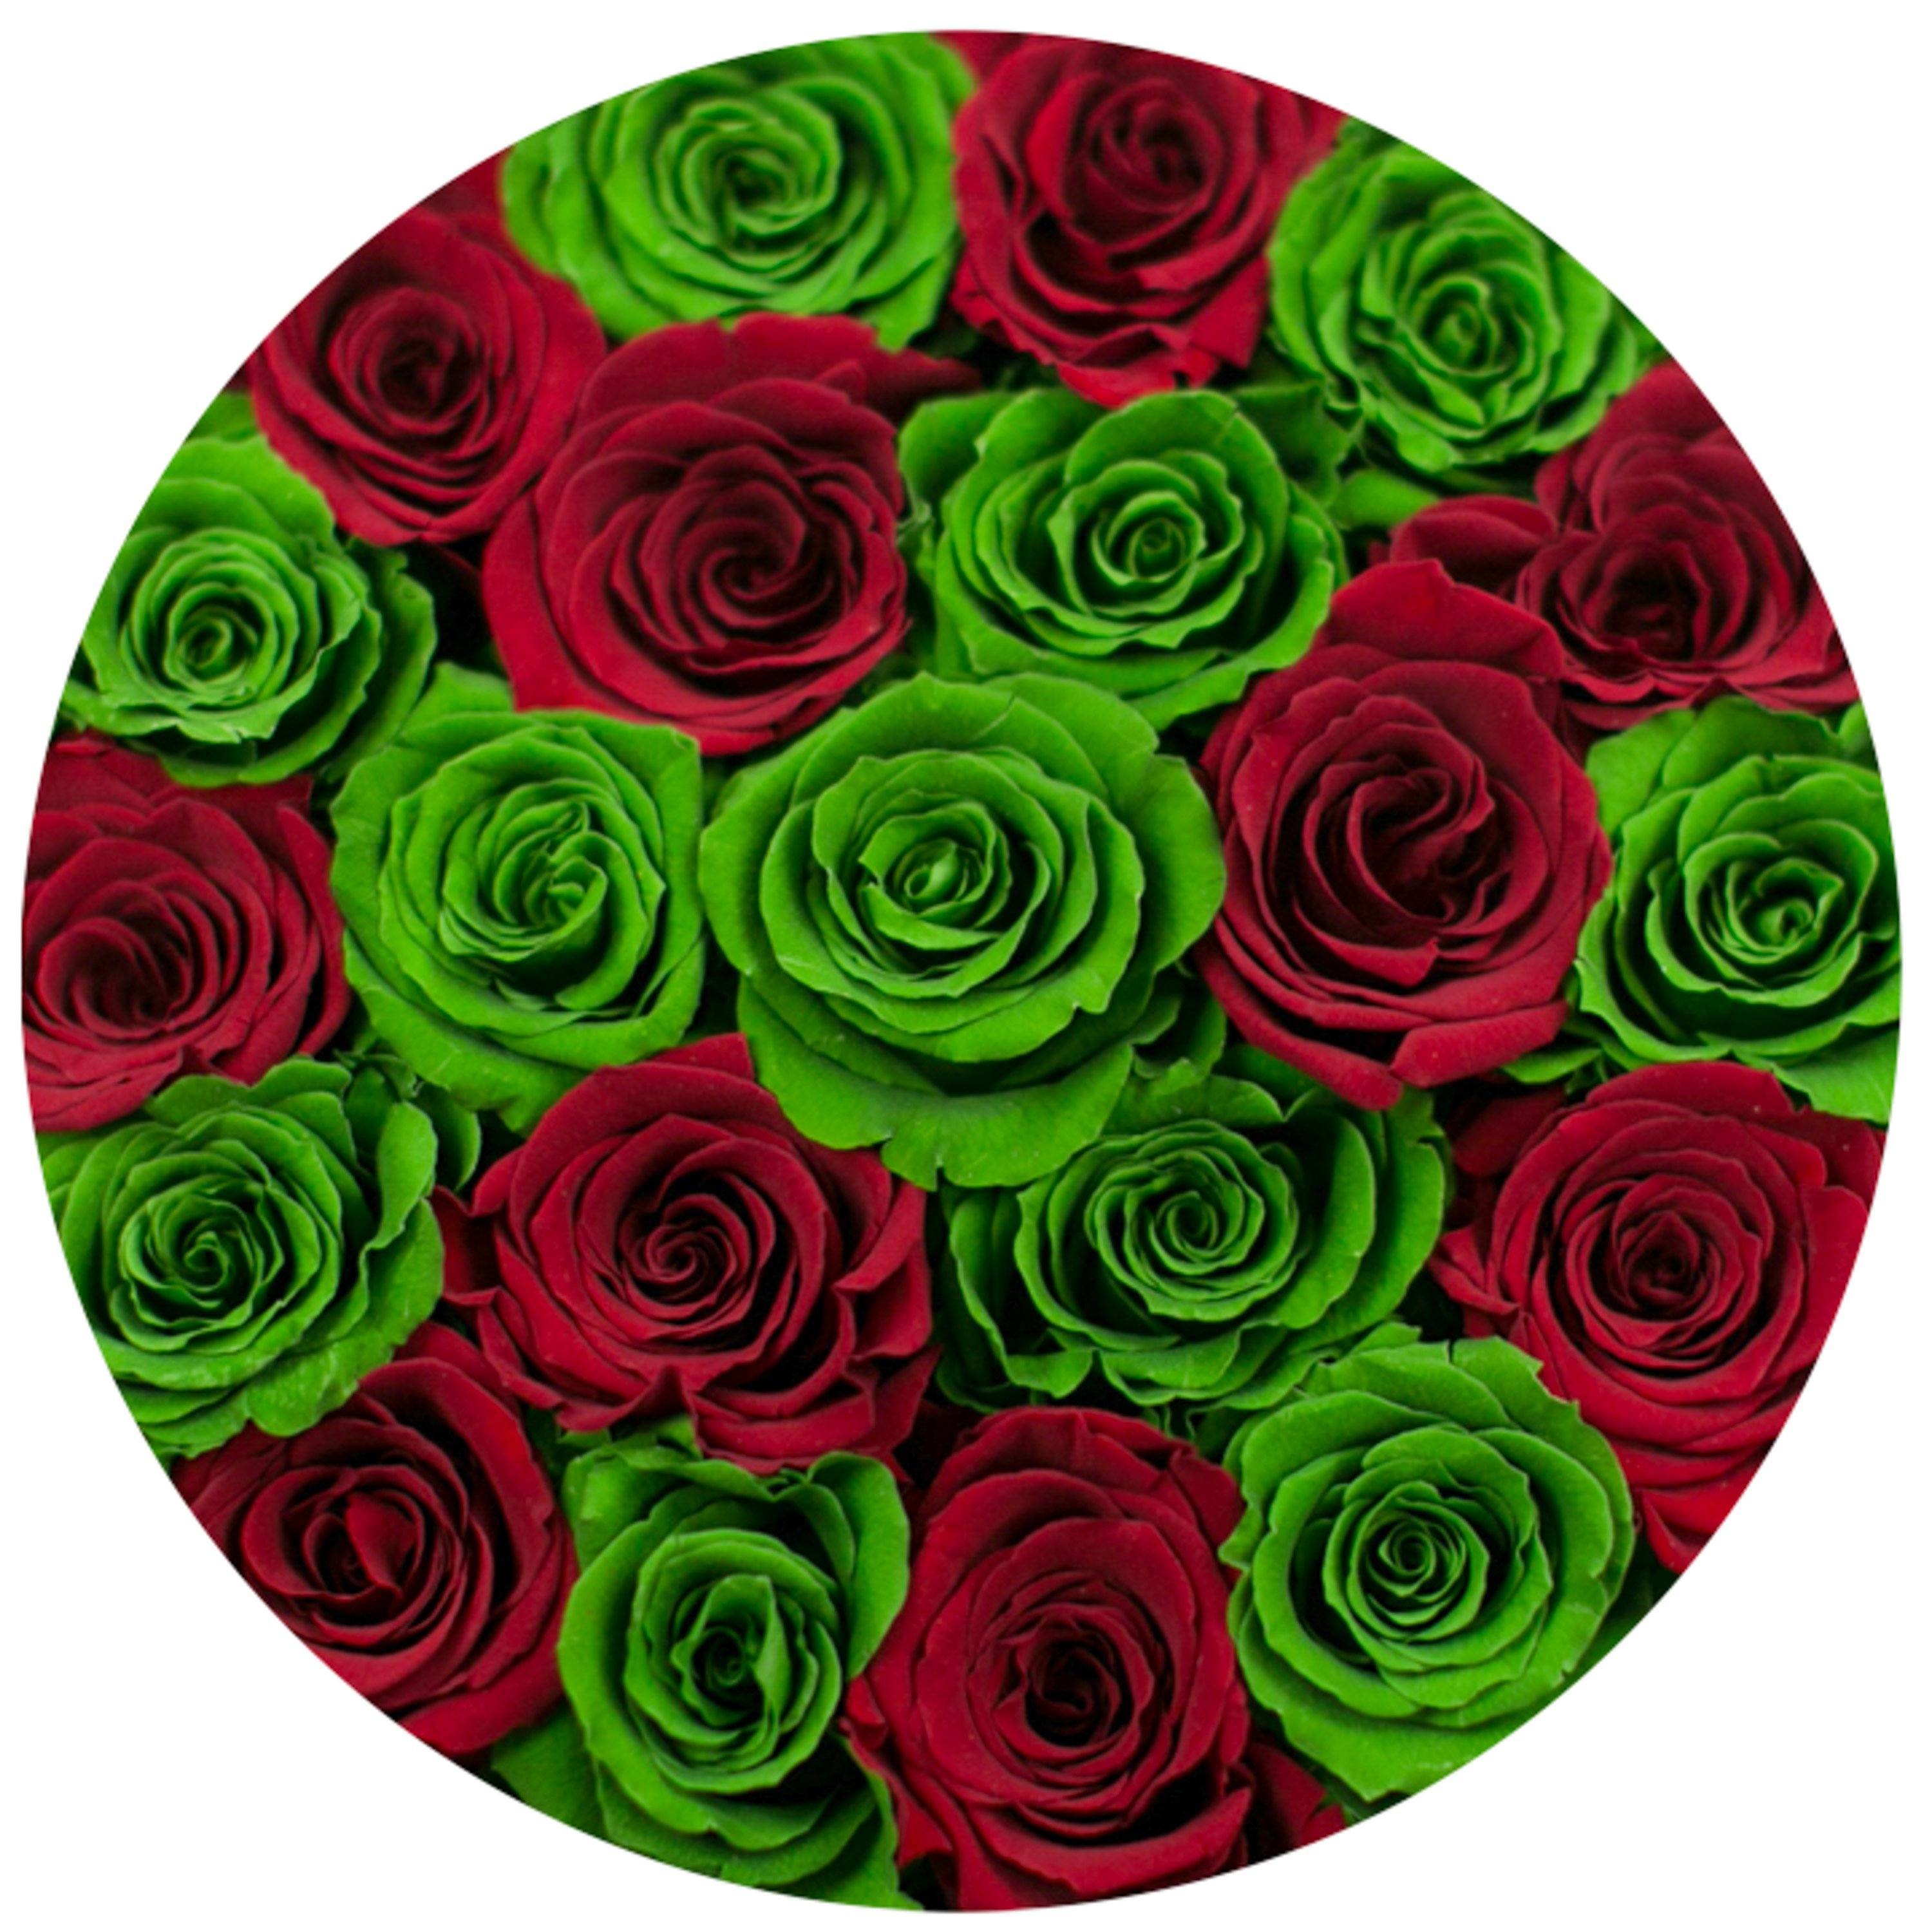 classic round box - gold - emerald-green&red roses red eternity roses - the million roses